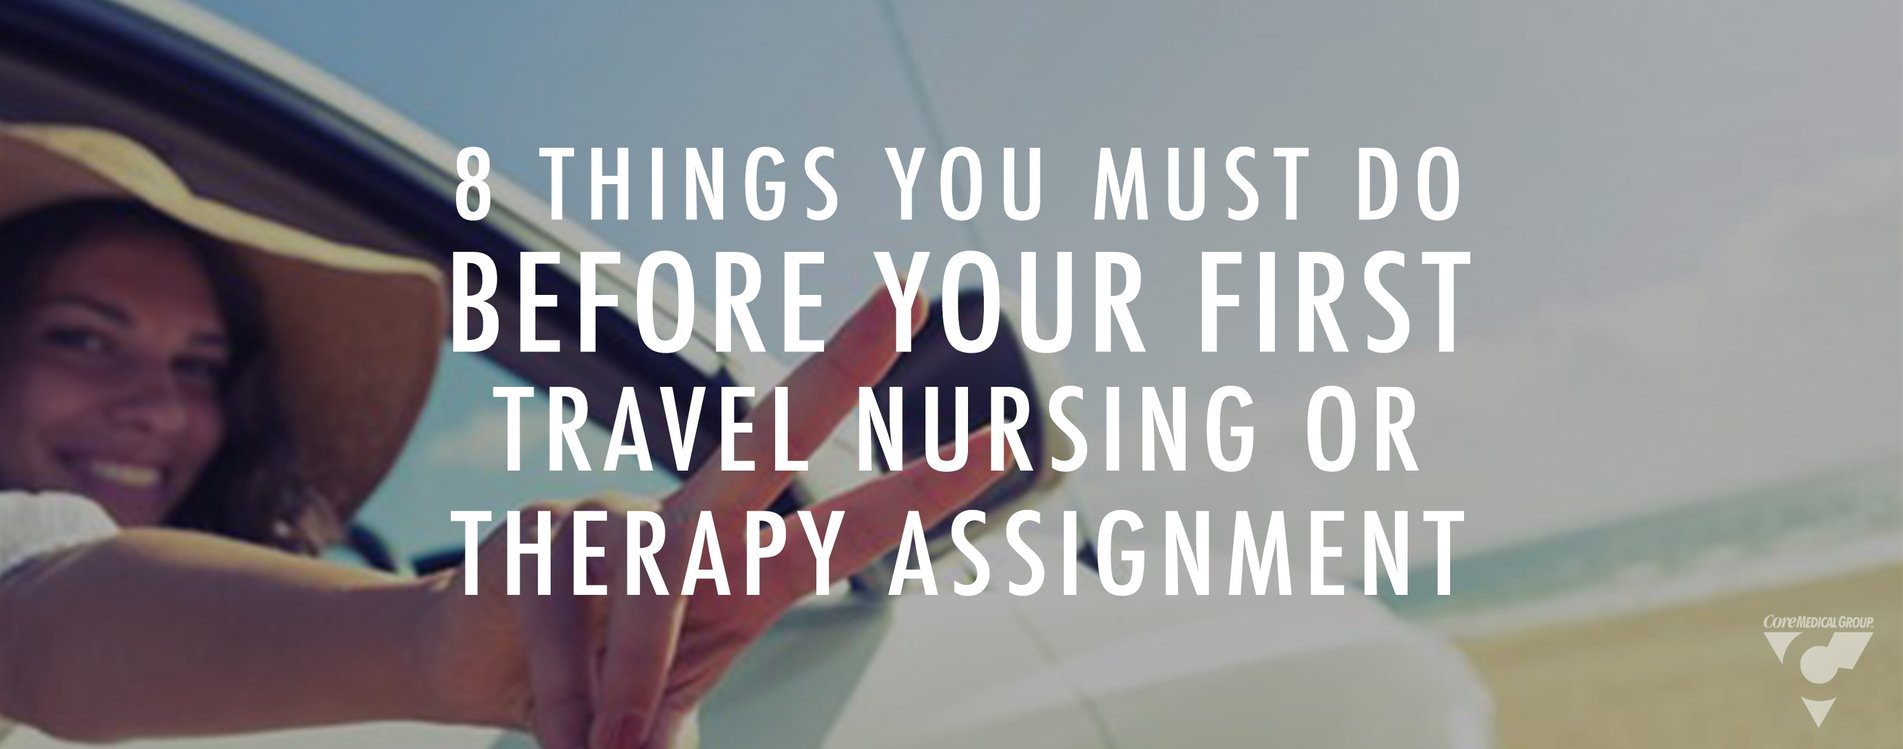 8 Things You Must Do Before Your First Travel Nursing Or Therapy Assignment